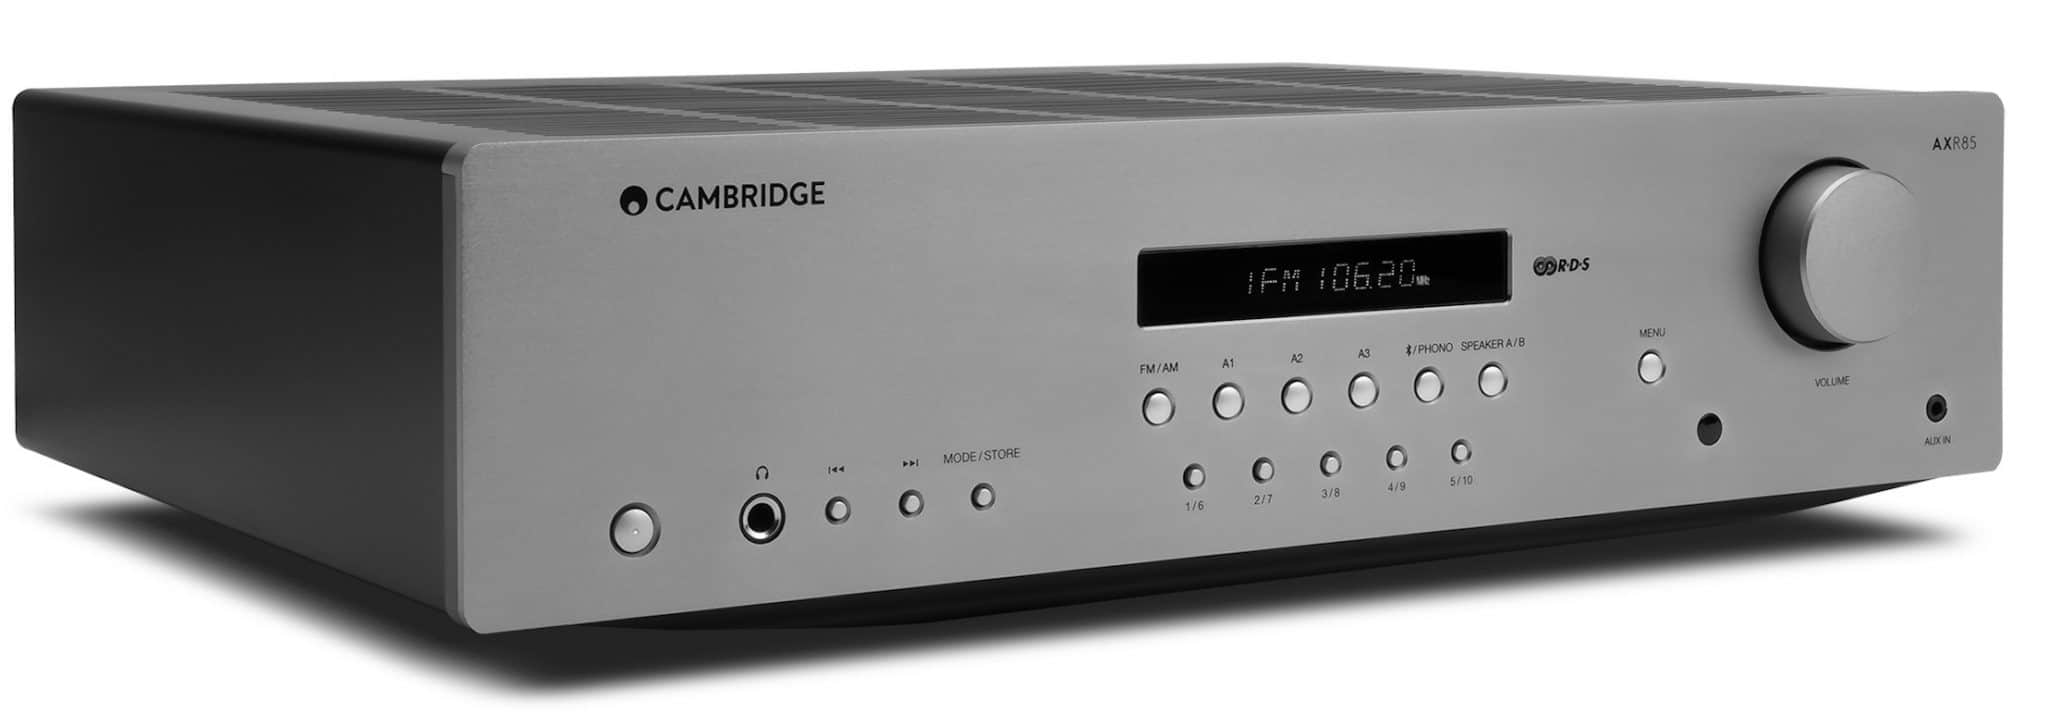 AX Series CD, Amps & Receivers From Cambridge